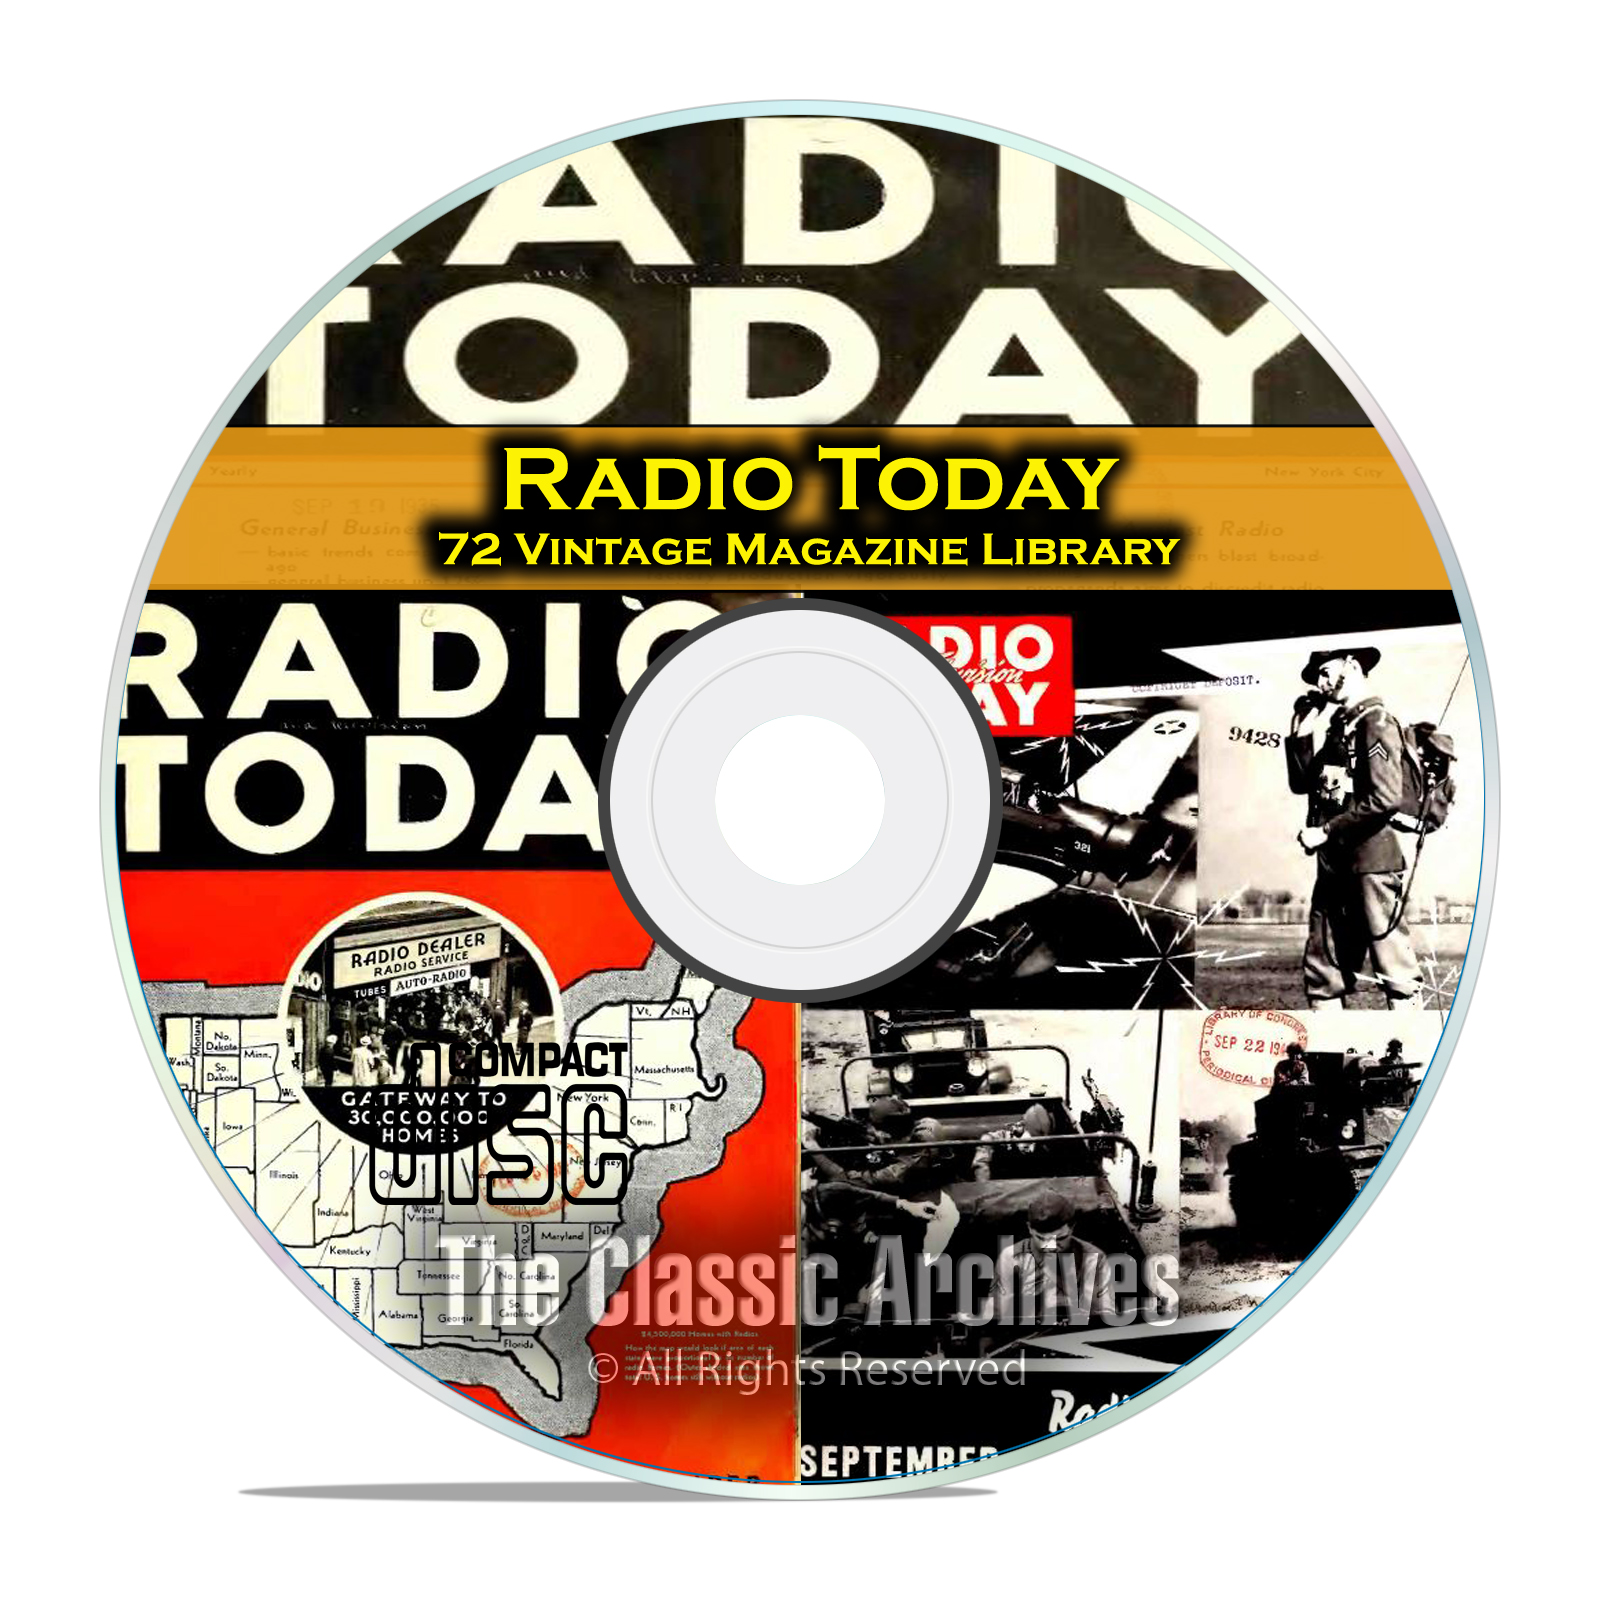 Radio Today, 72 Vintage Old Time Radio Magazine Collection in PDF on CD